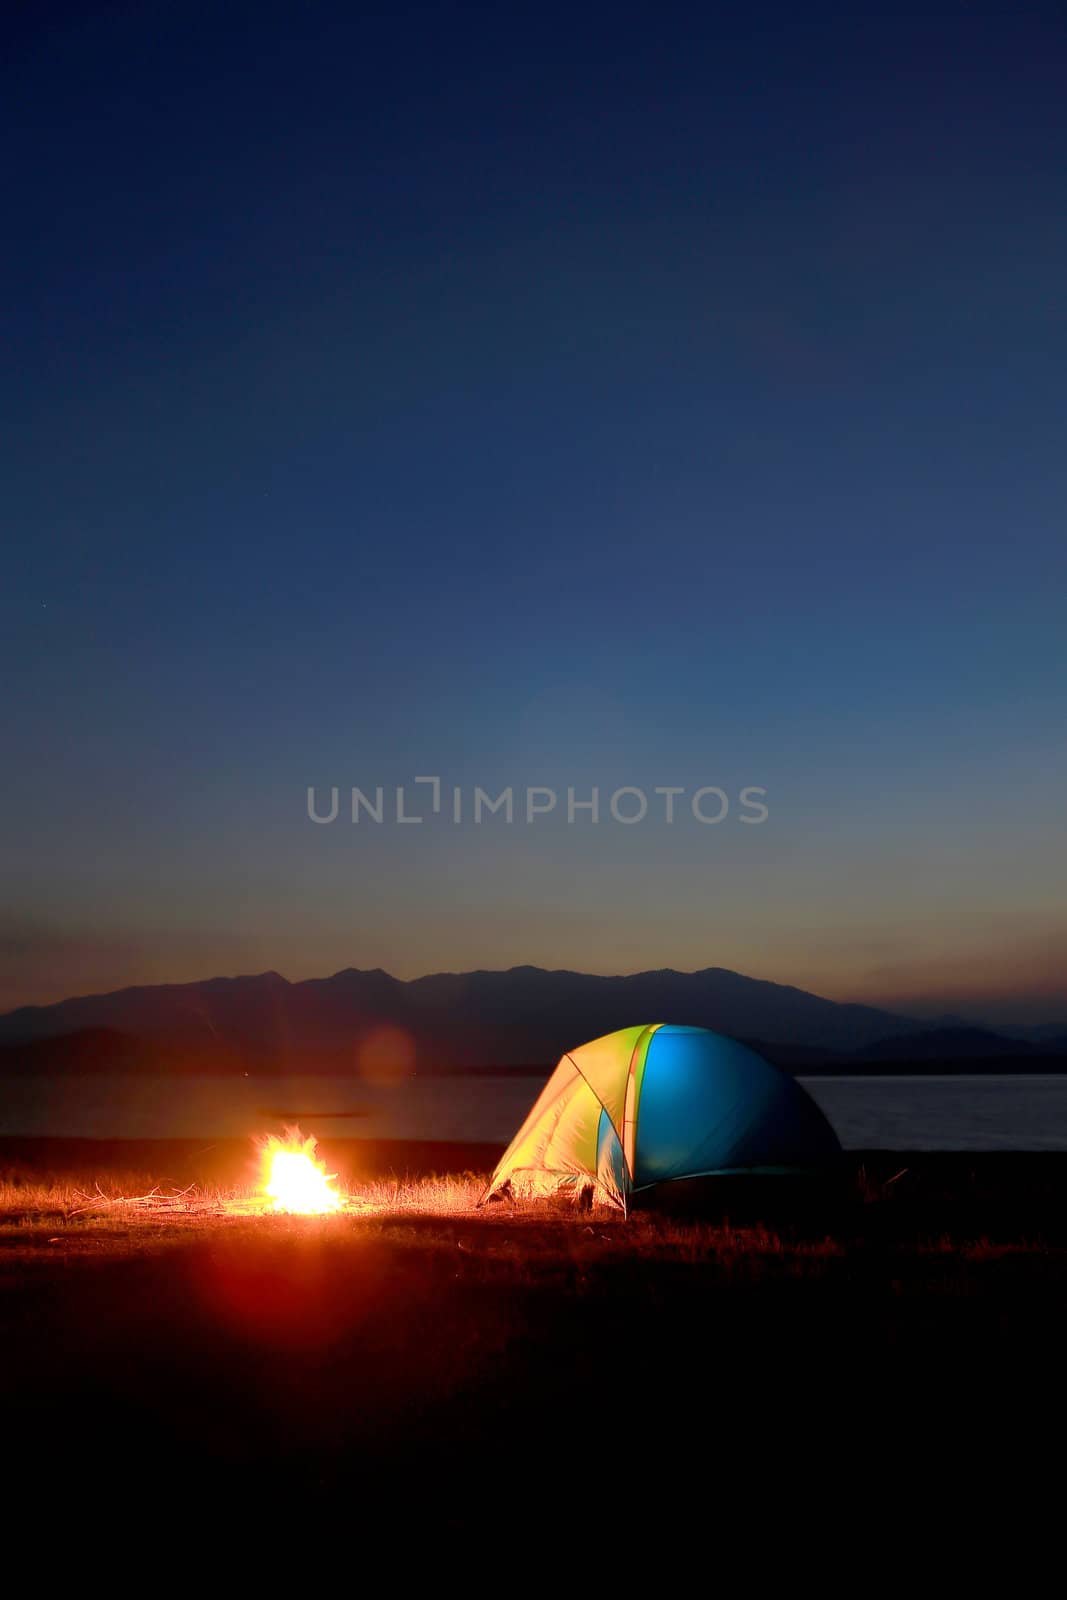 tent and campfire at sunset,beside the lake by rufous